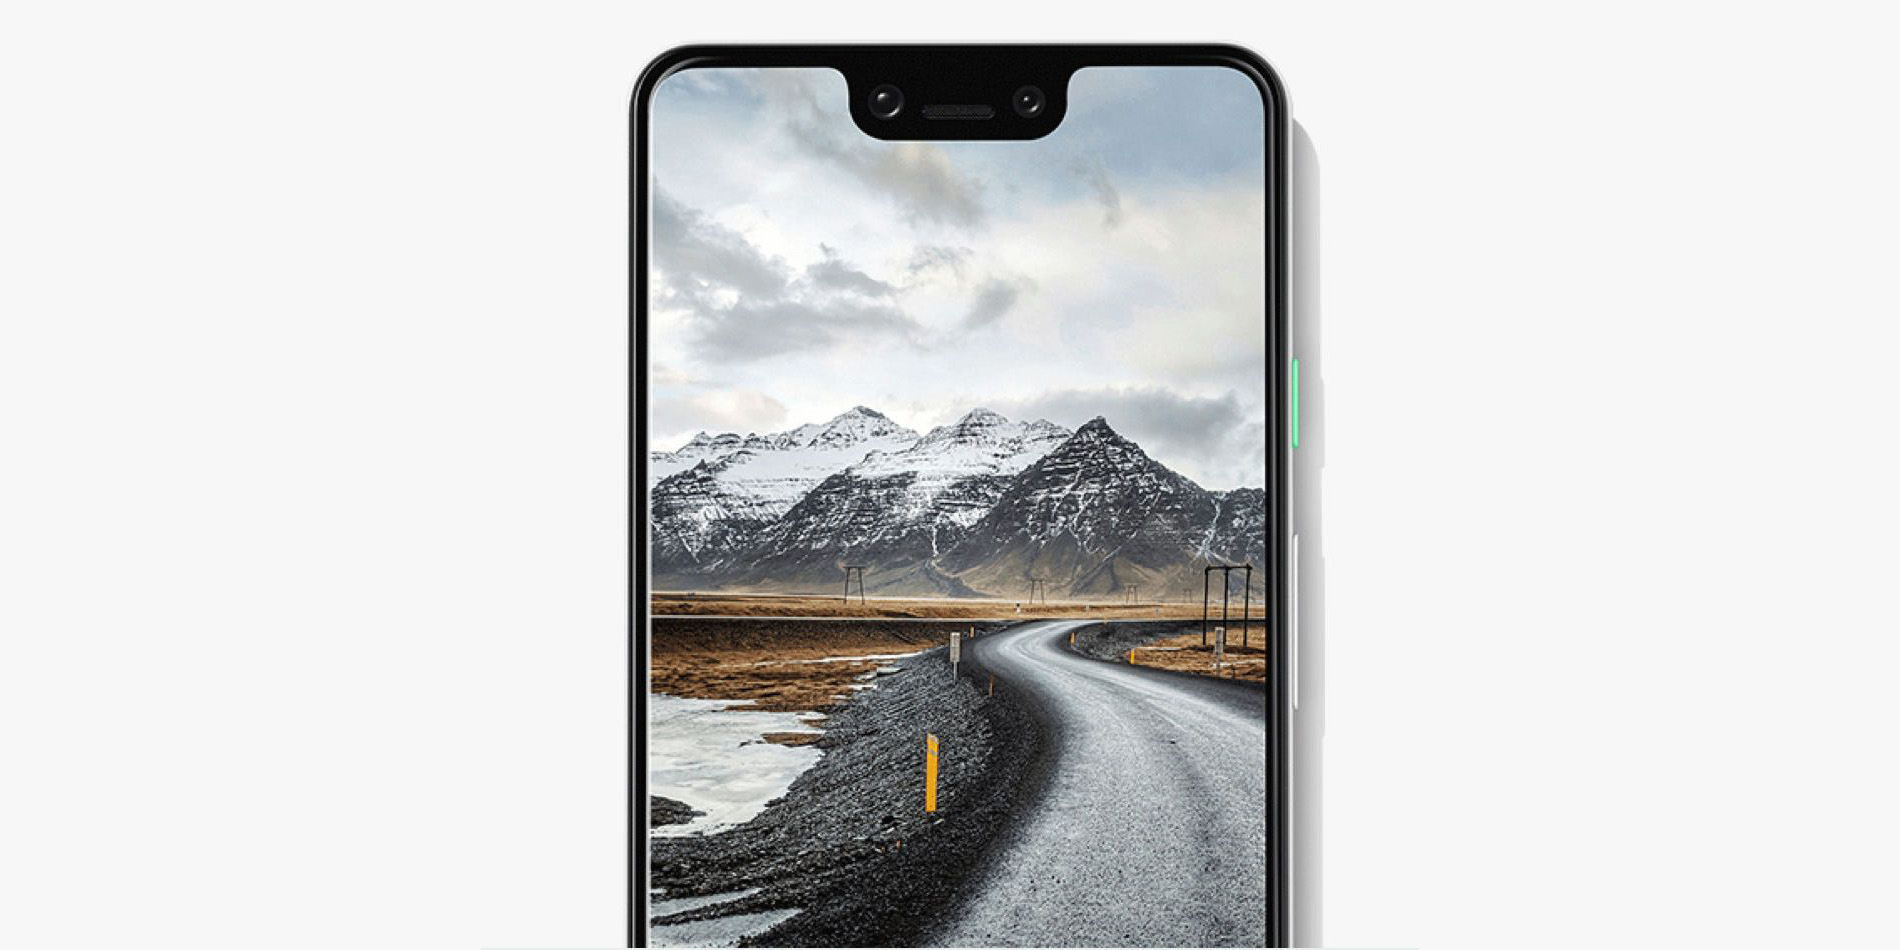 Pixel 3 shows up on Verizon's site ahead of launch - 9to5Google